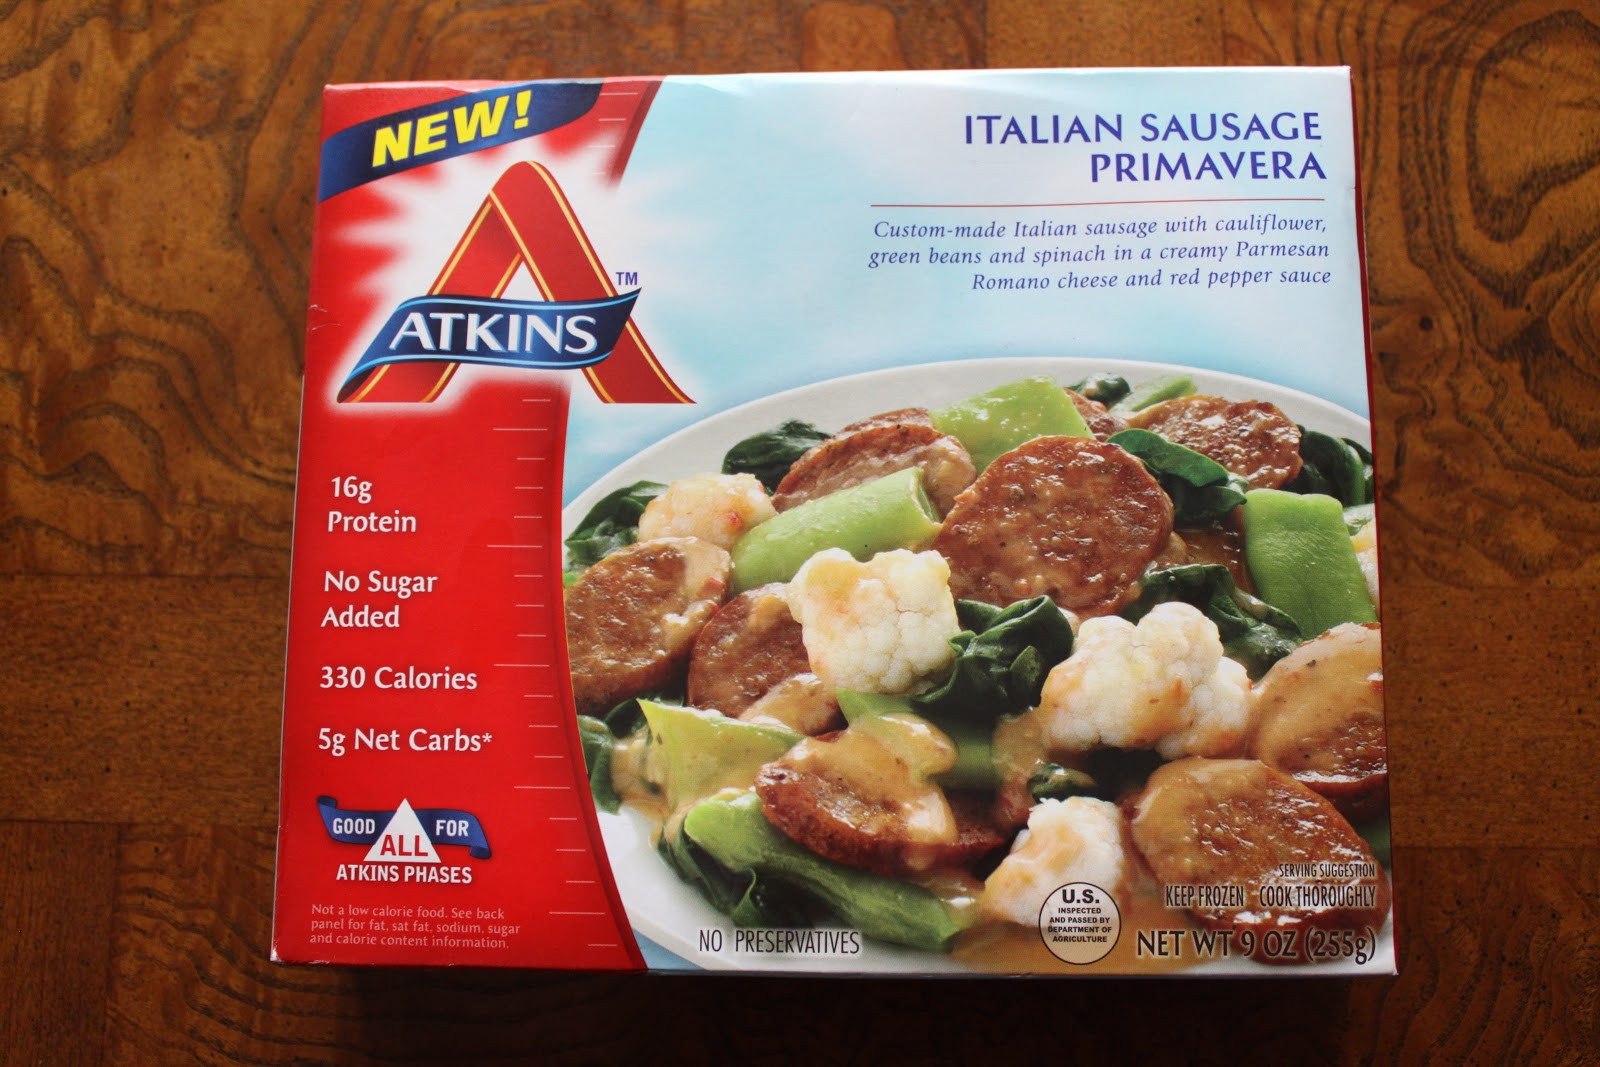 Low Carb Frozen Dinners
 Atkins Frozen Meal Review – Italian Sausage Primavera